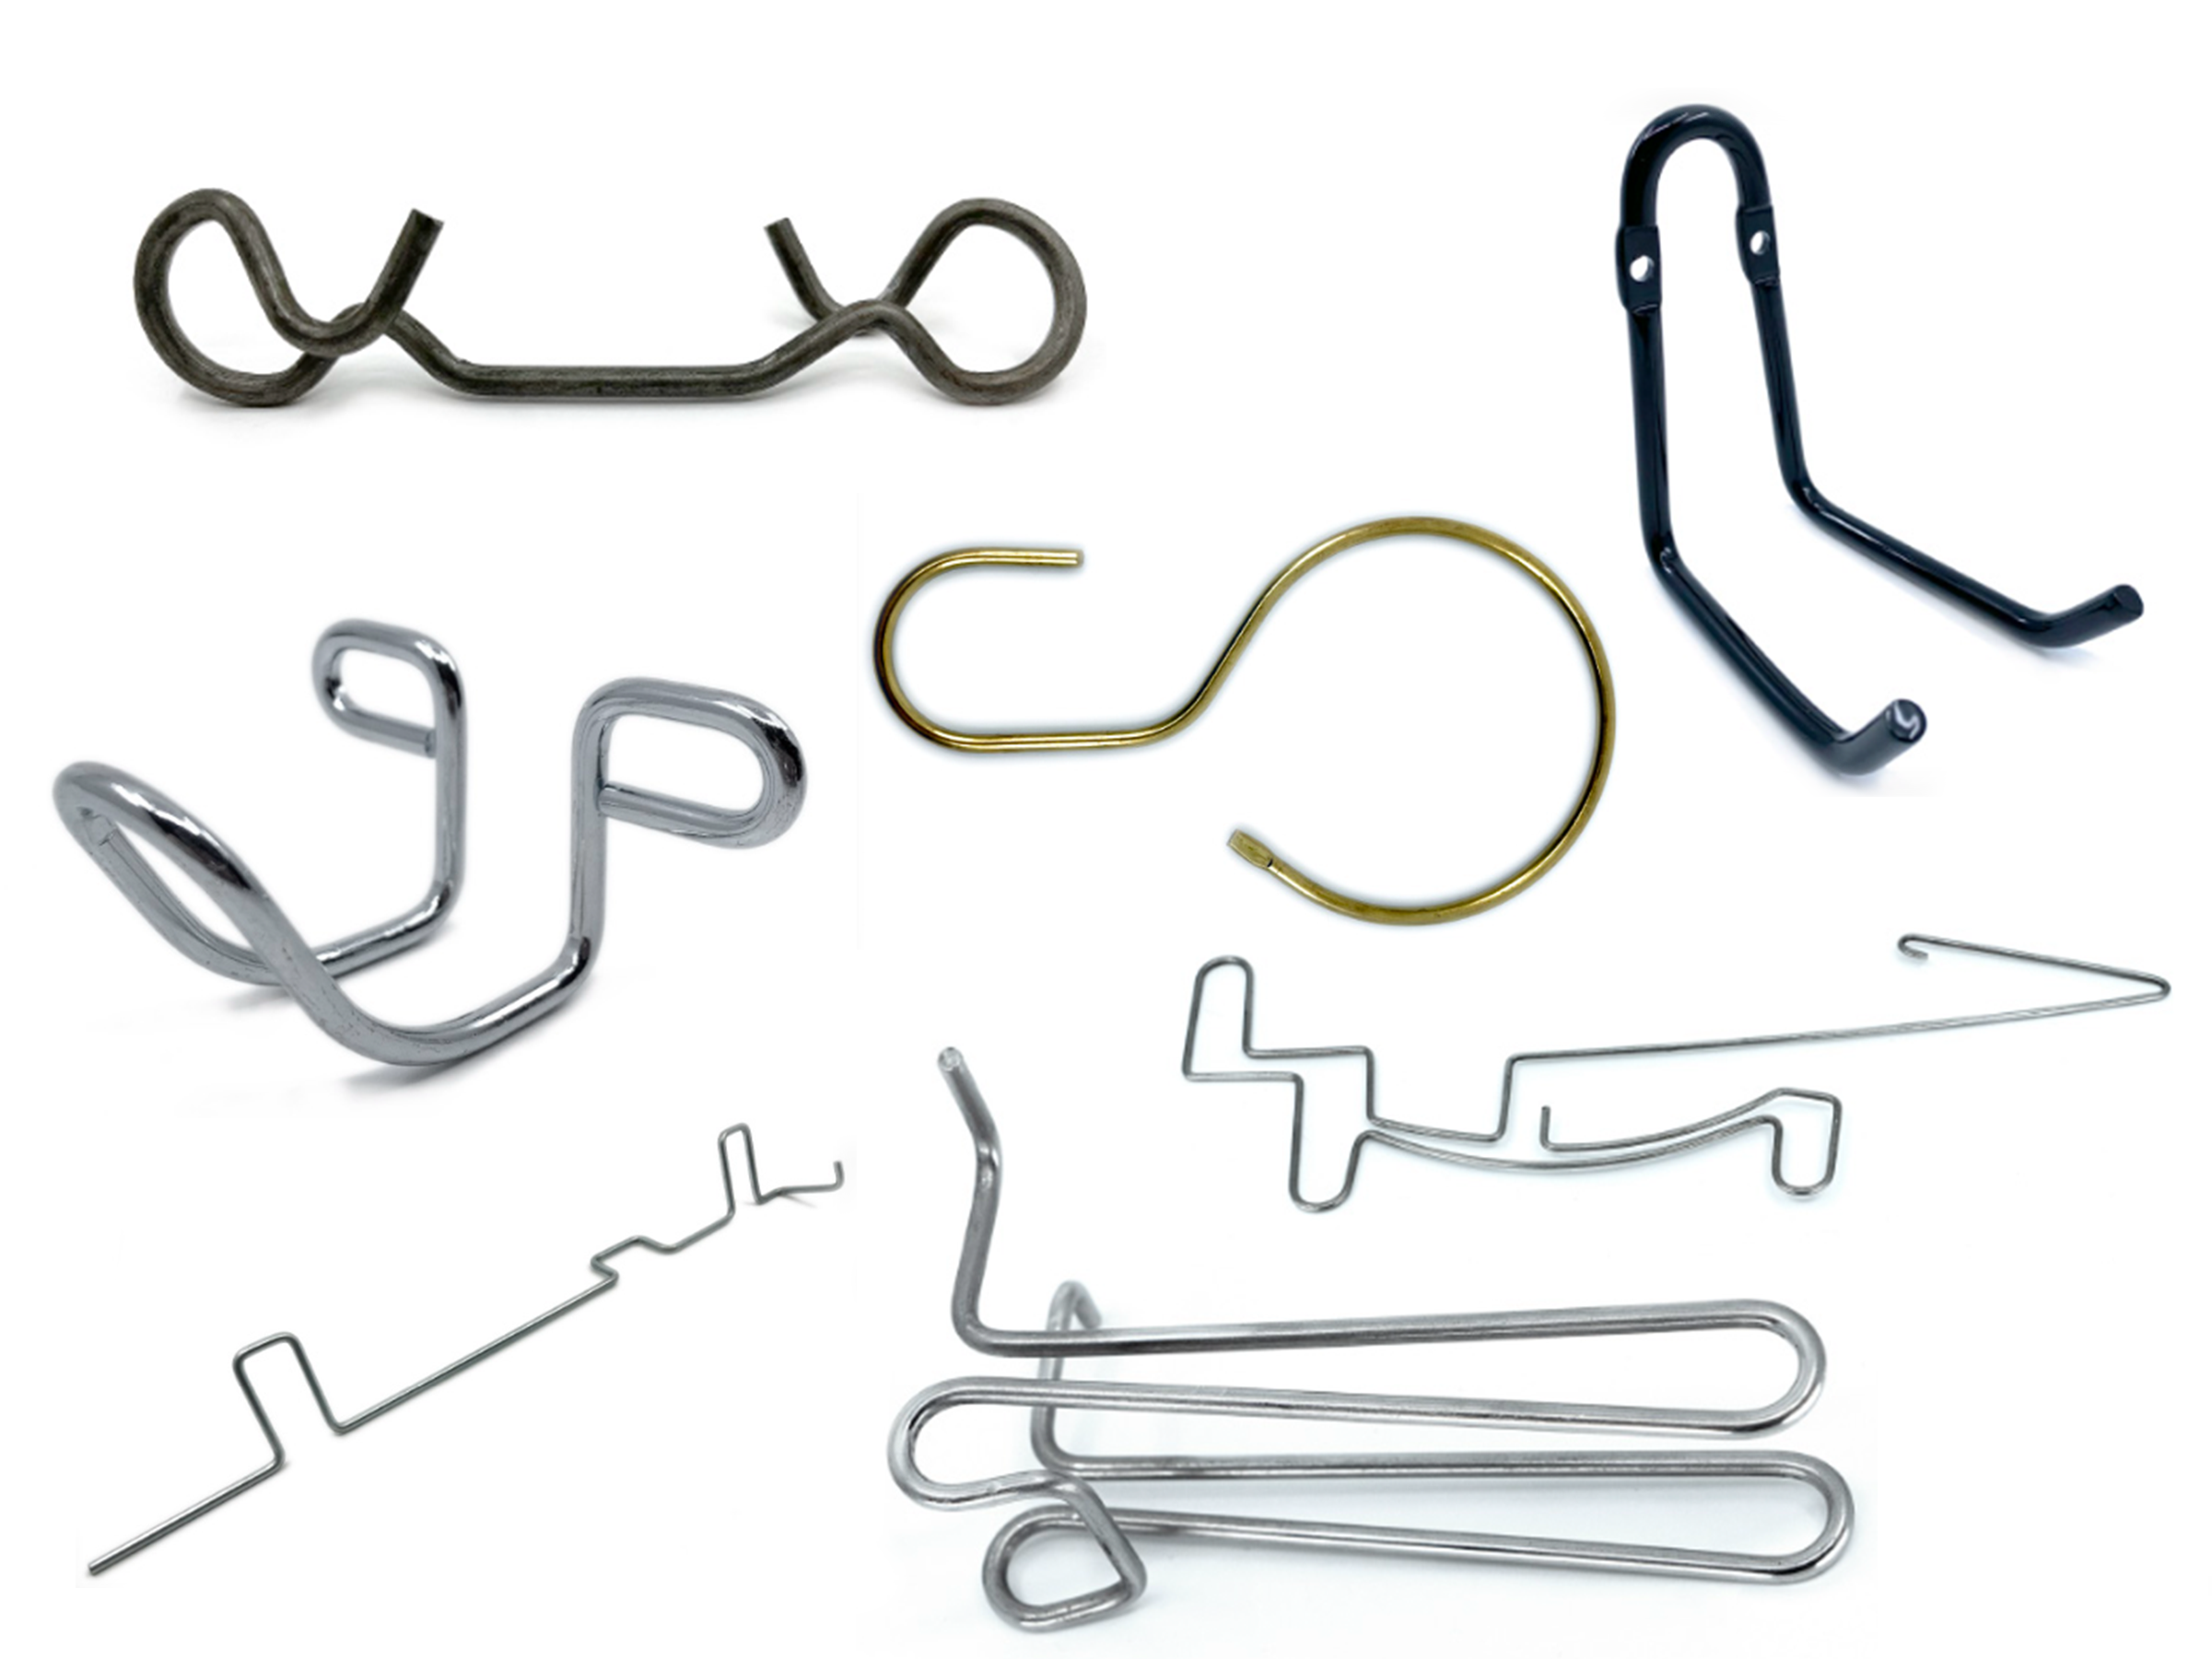 Custom wire forms from Western Wire